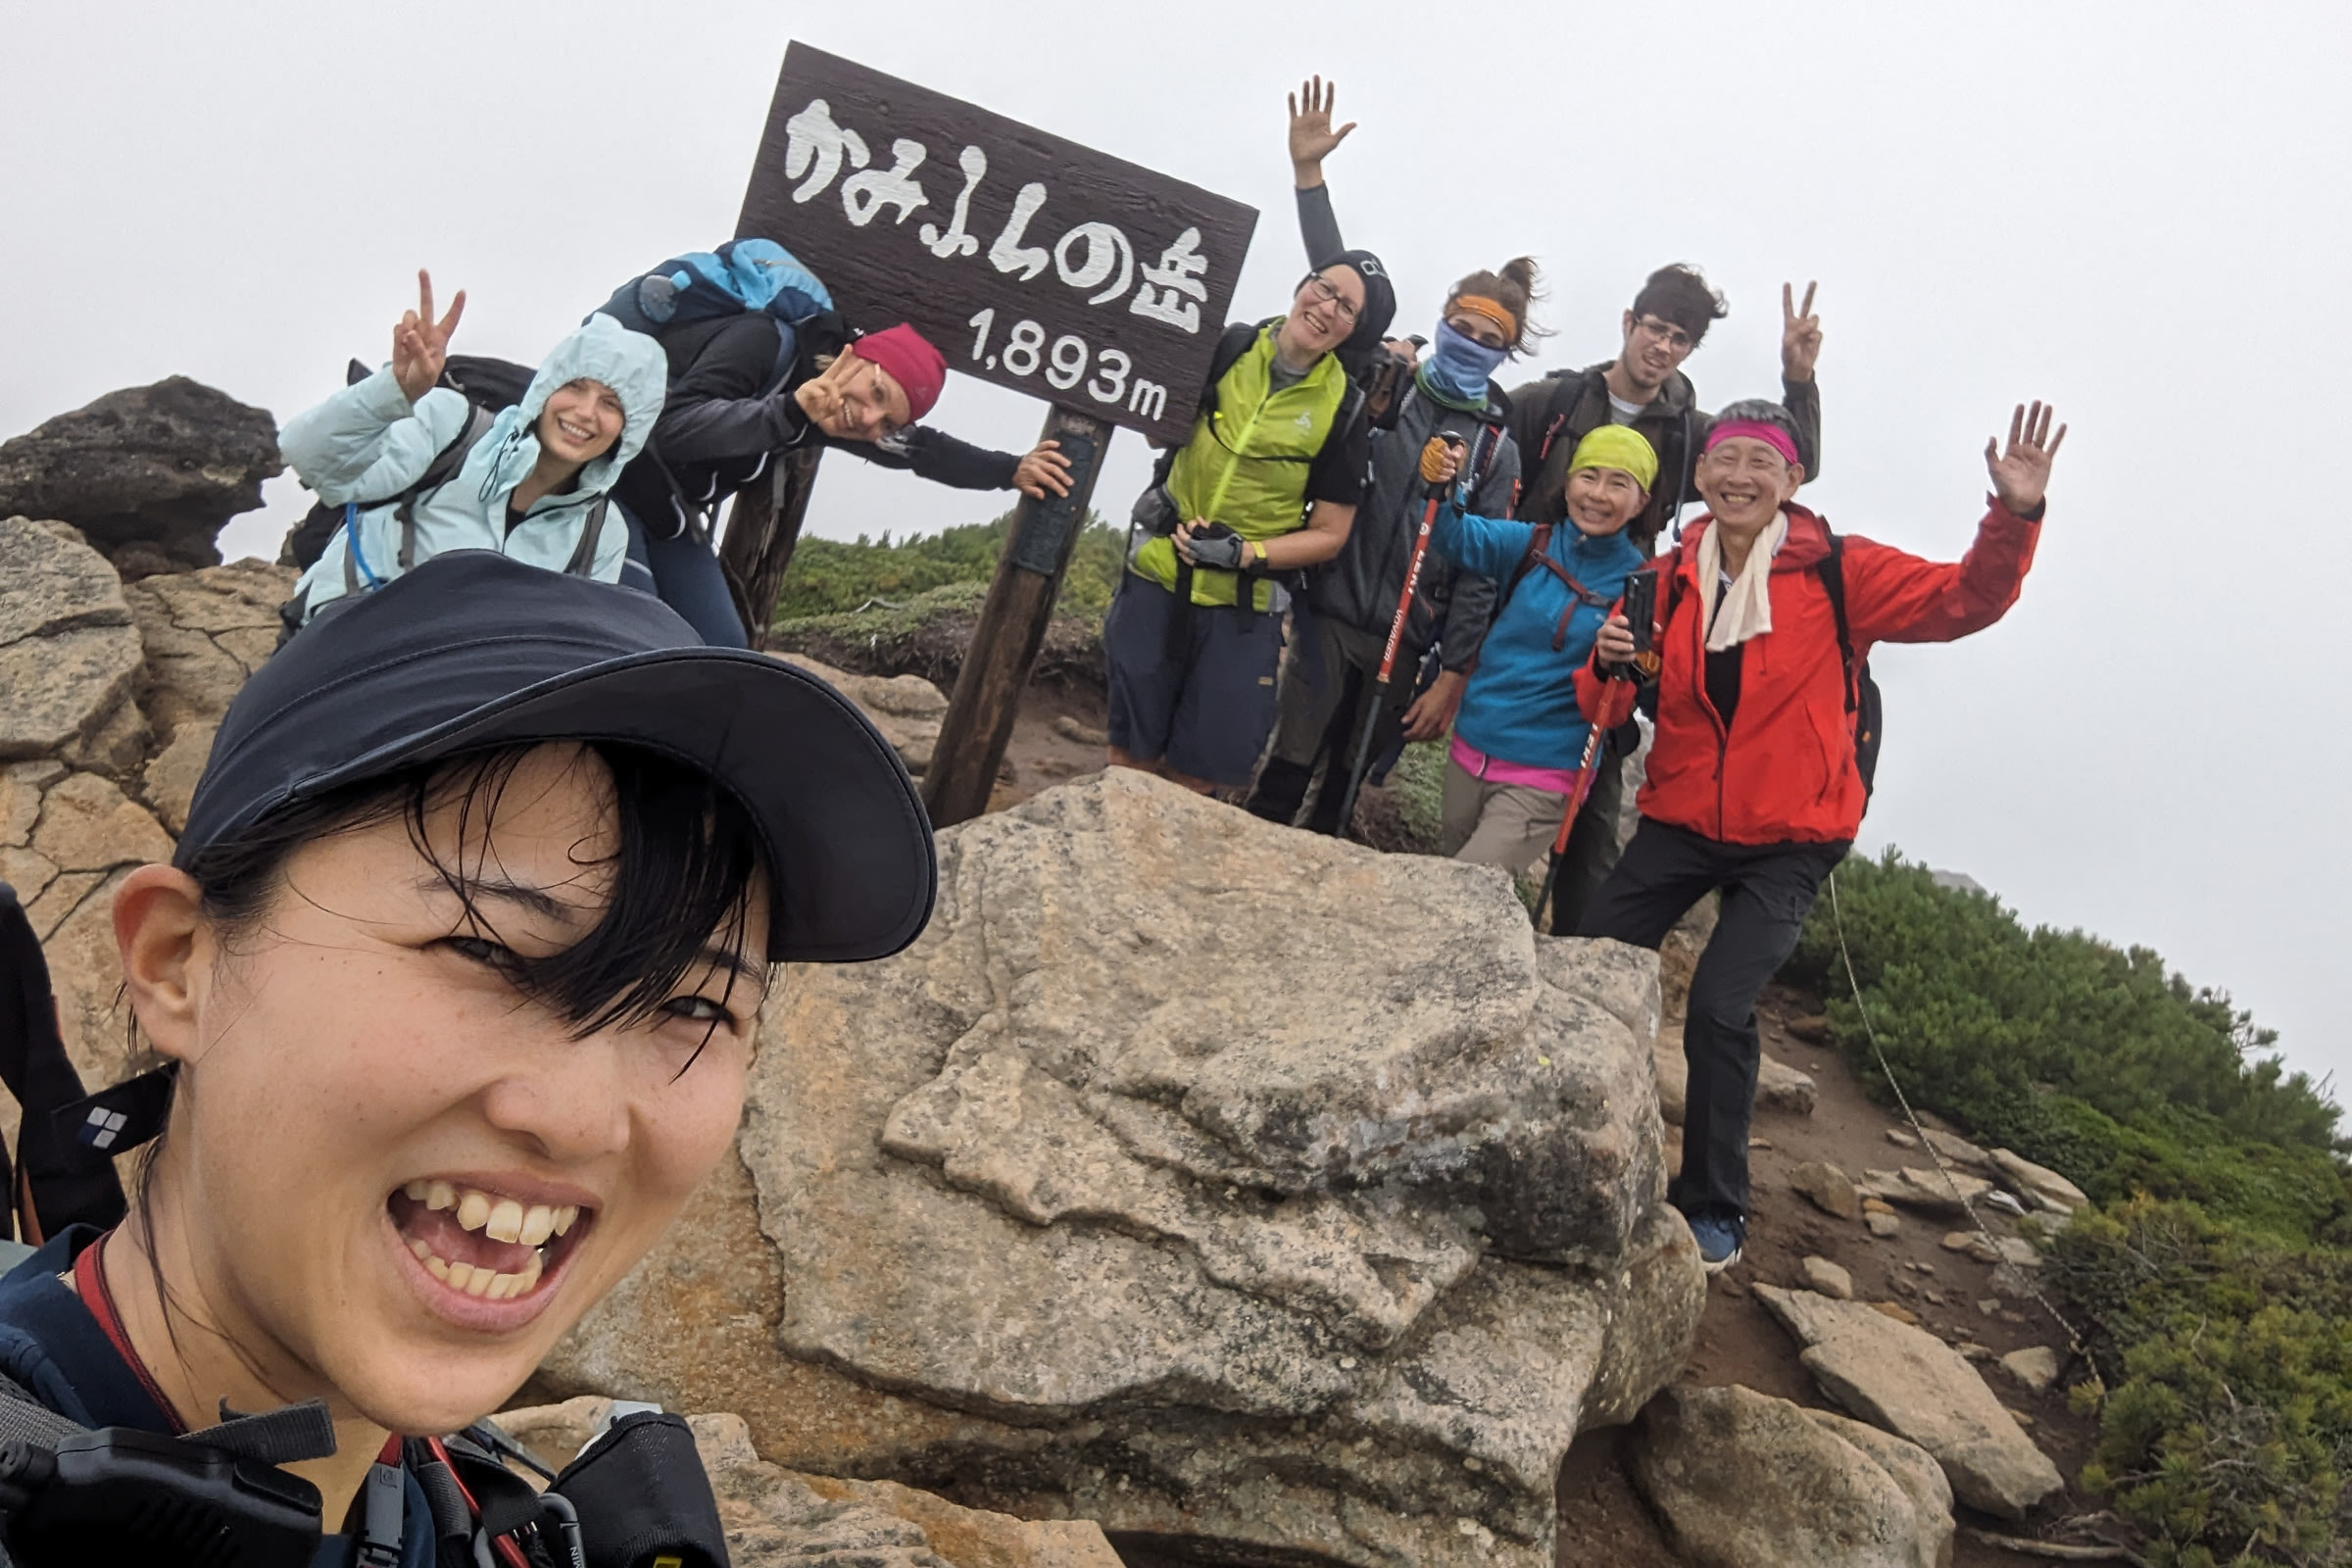 Adventure Hokkaido guide Yuka poses for a selfie with hikers atop a mountain. A sign in Japanese reads "Mt. Kamifurano - 1893m").